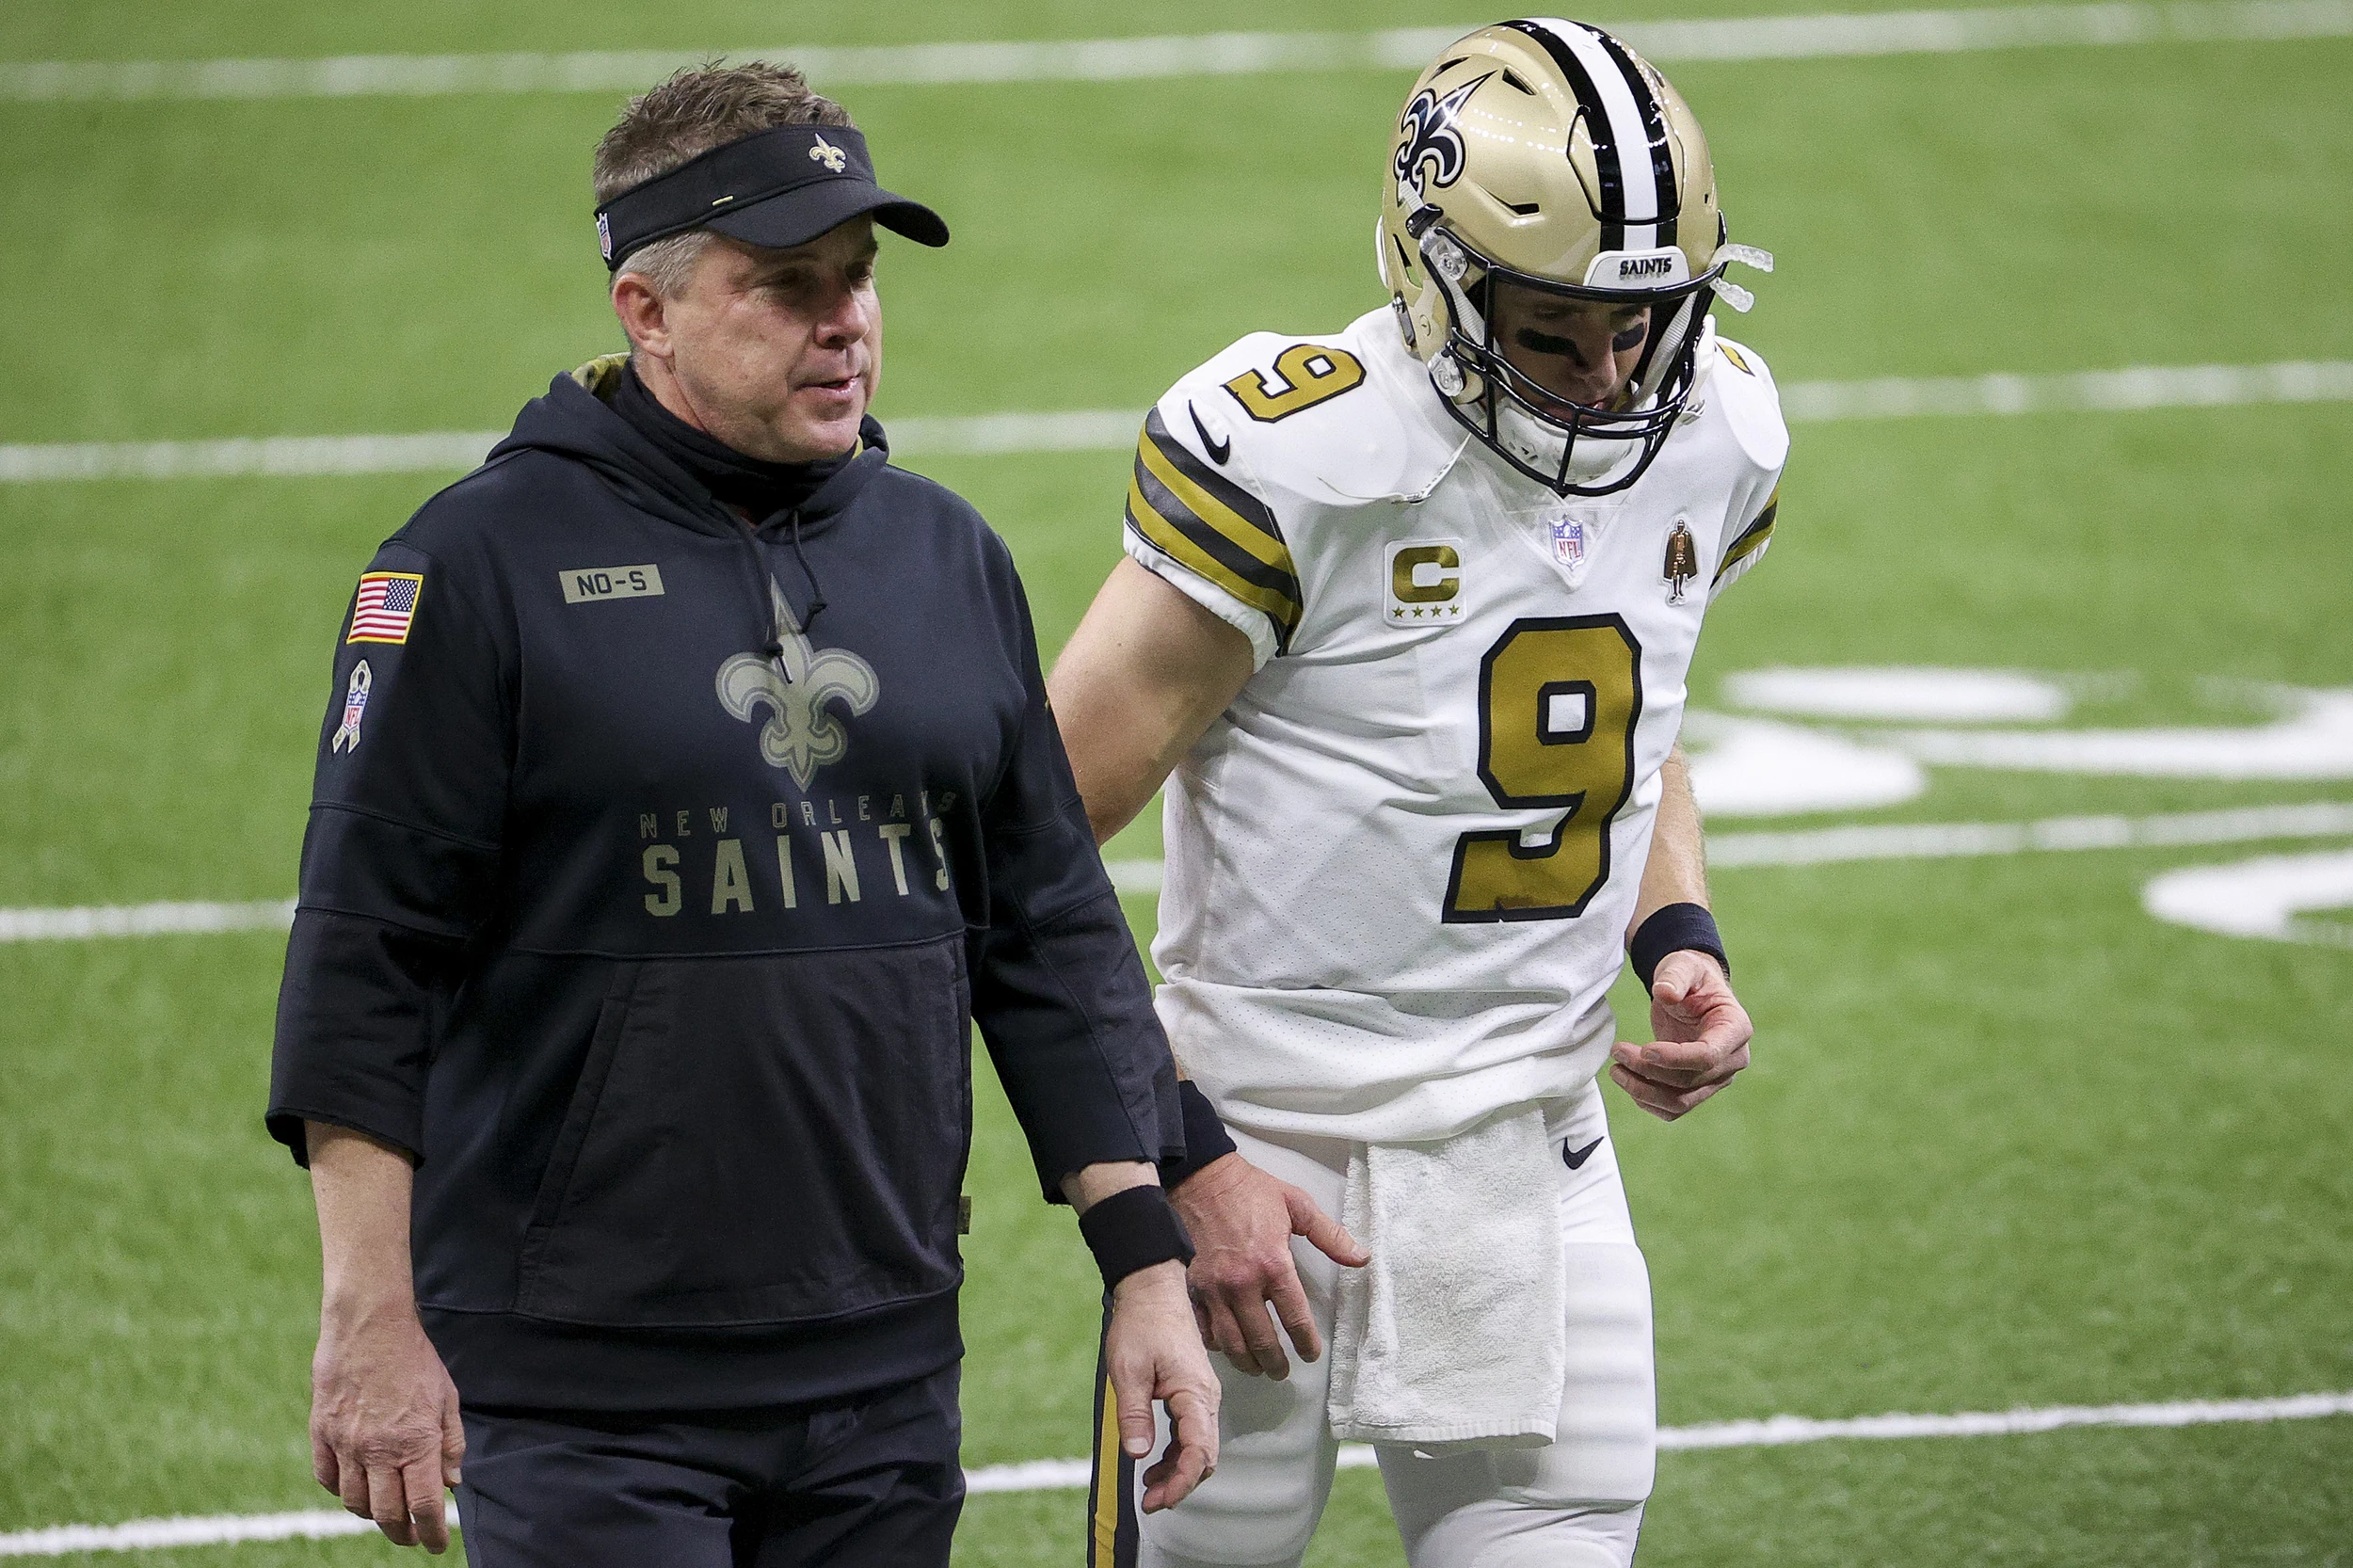 Drew Brees and Sean Payton May Be Reunited Soon